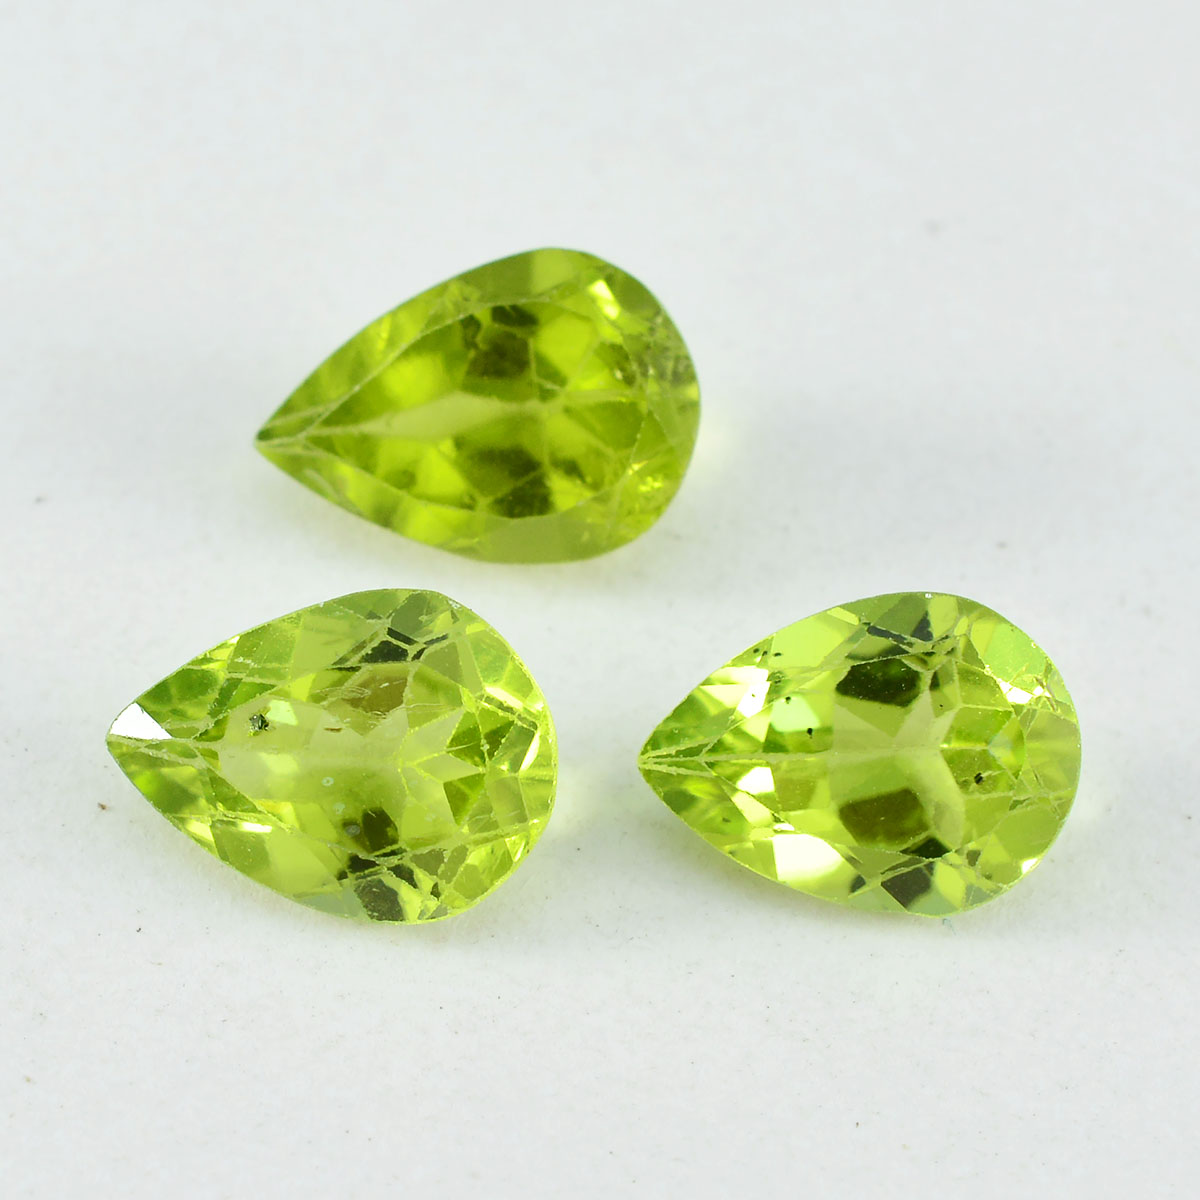 Riyogems 1PC Genuine Green Peridot Faceted 12x16 mm Pear Shape awesome Quality Loose Stone